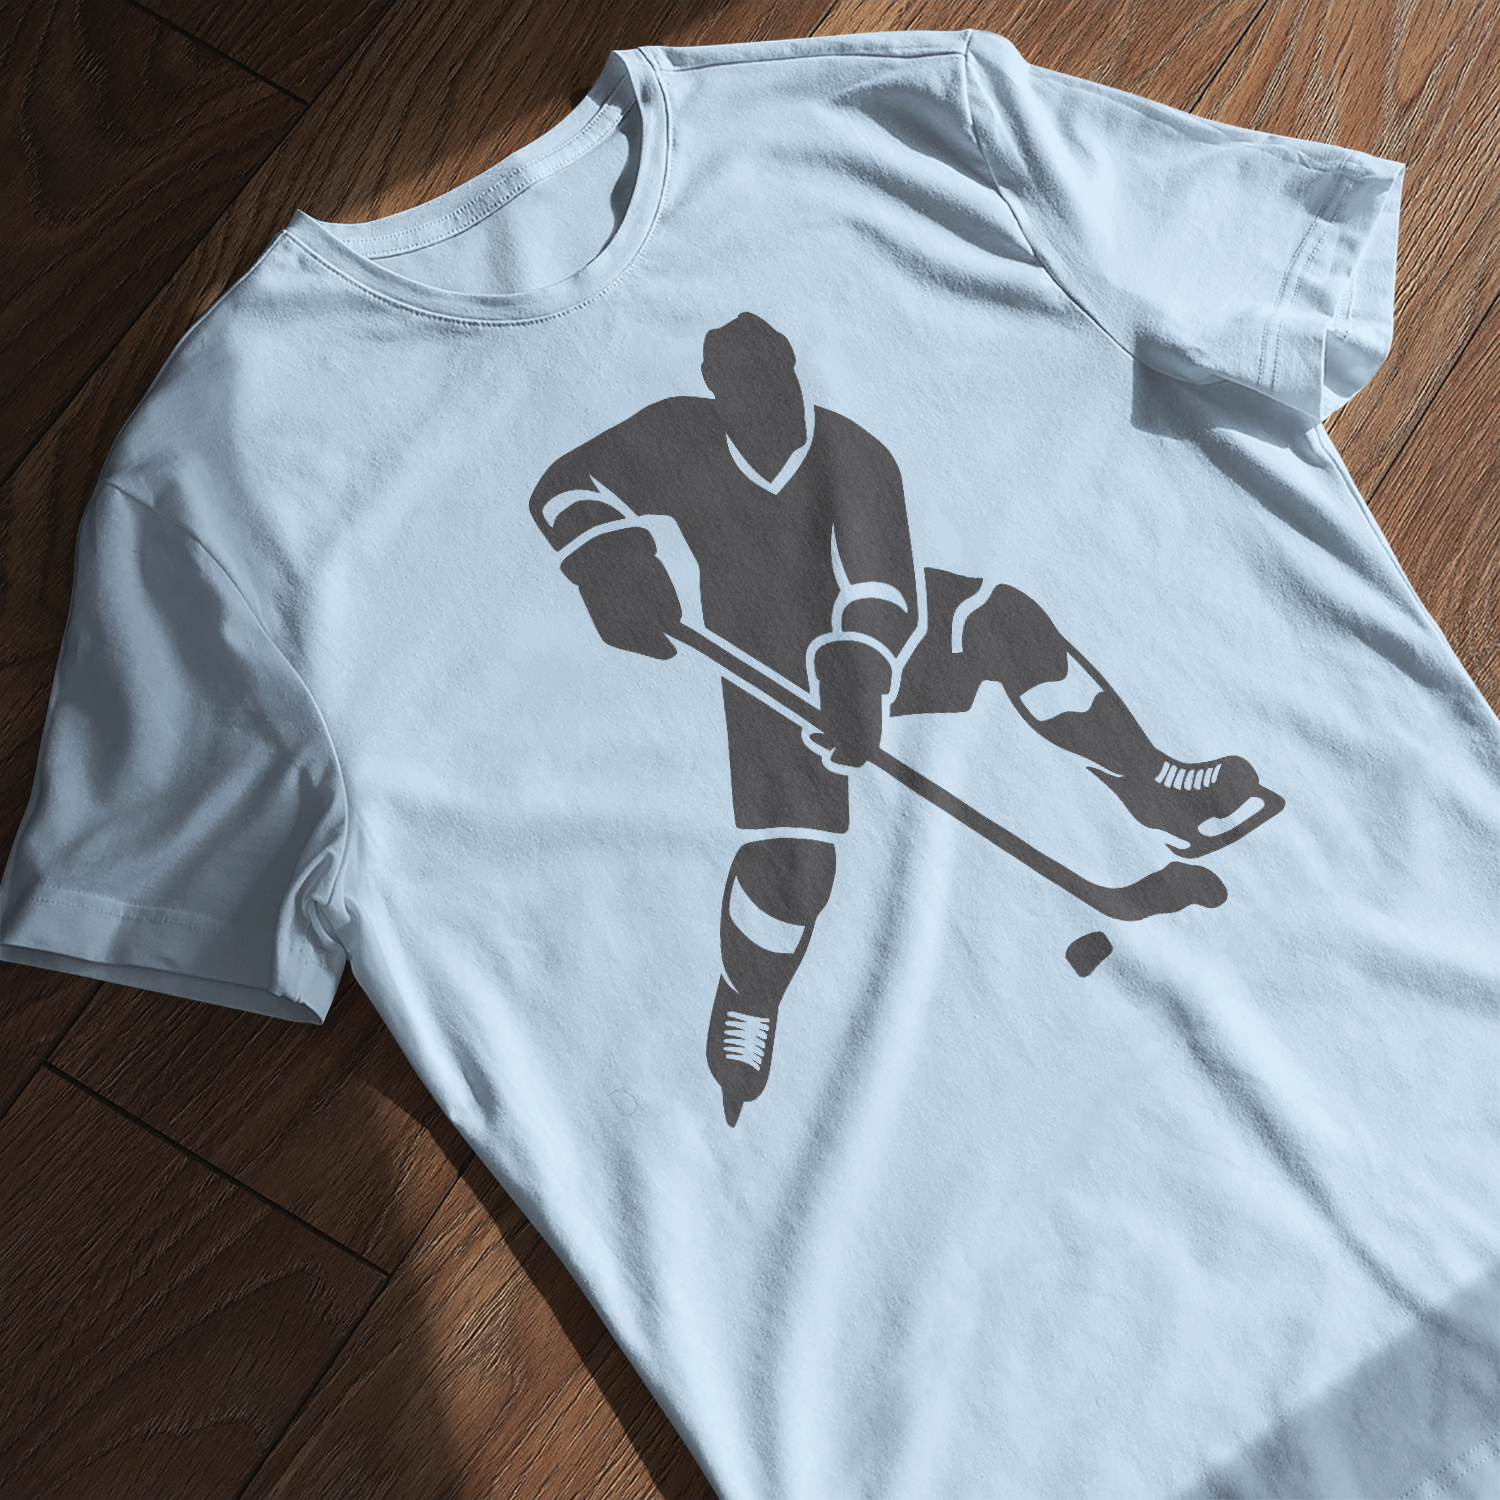 Hockey Warrior SVG, PNG, DXF Files for Cricut, Silhouette, and Laser ...